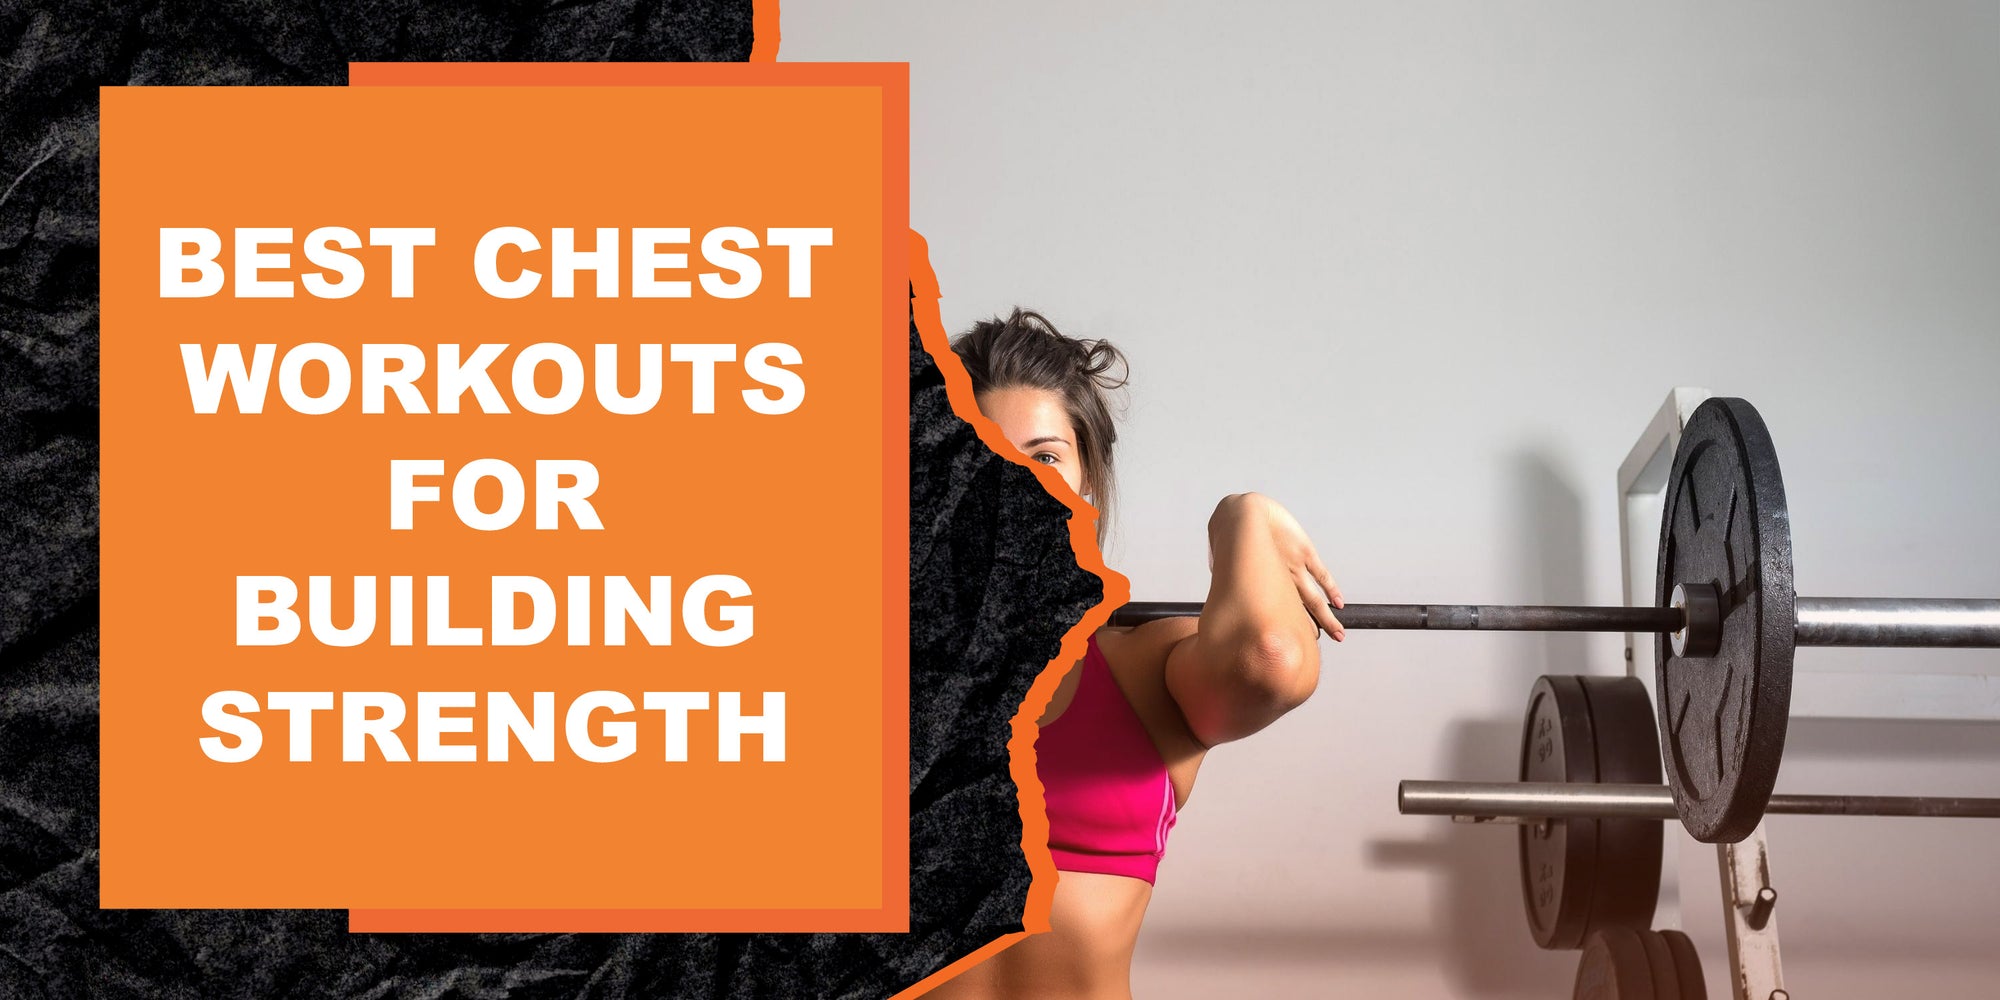 The Best Chest Workouts for Building Strength and Definition